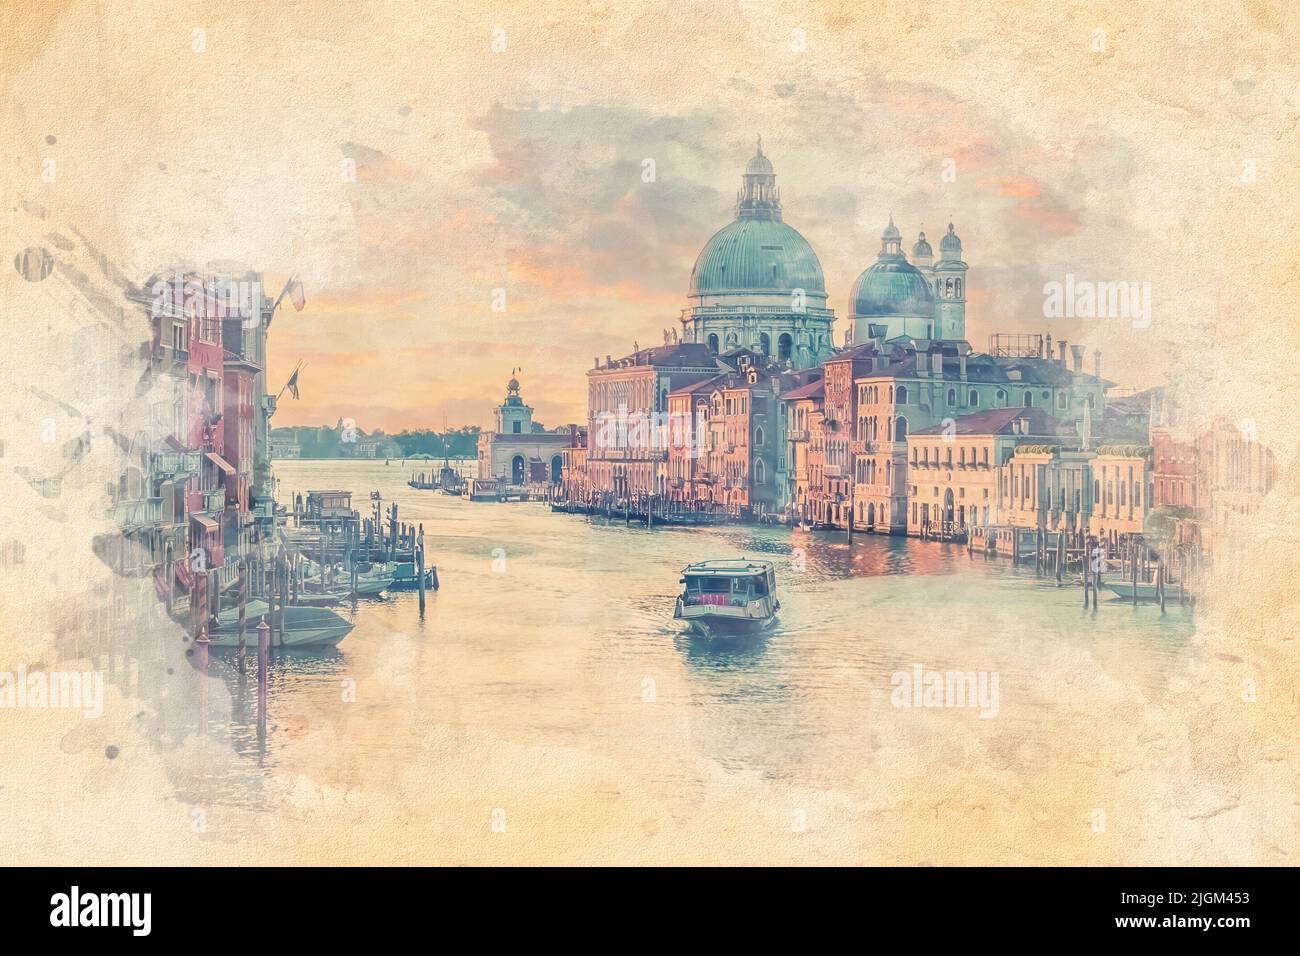 Grand Canal in Venice city - Watercolor effect illustration Stock Photo